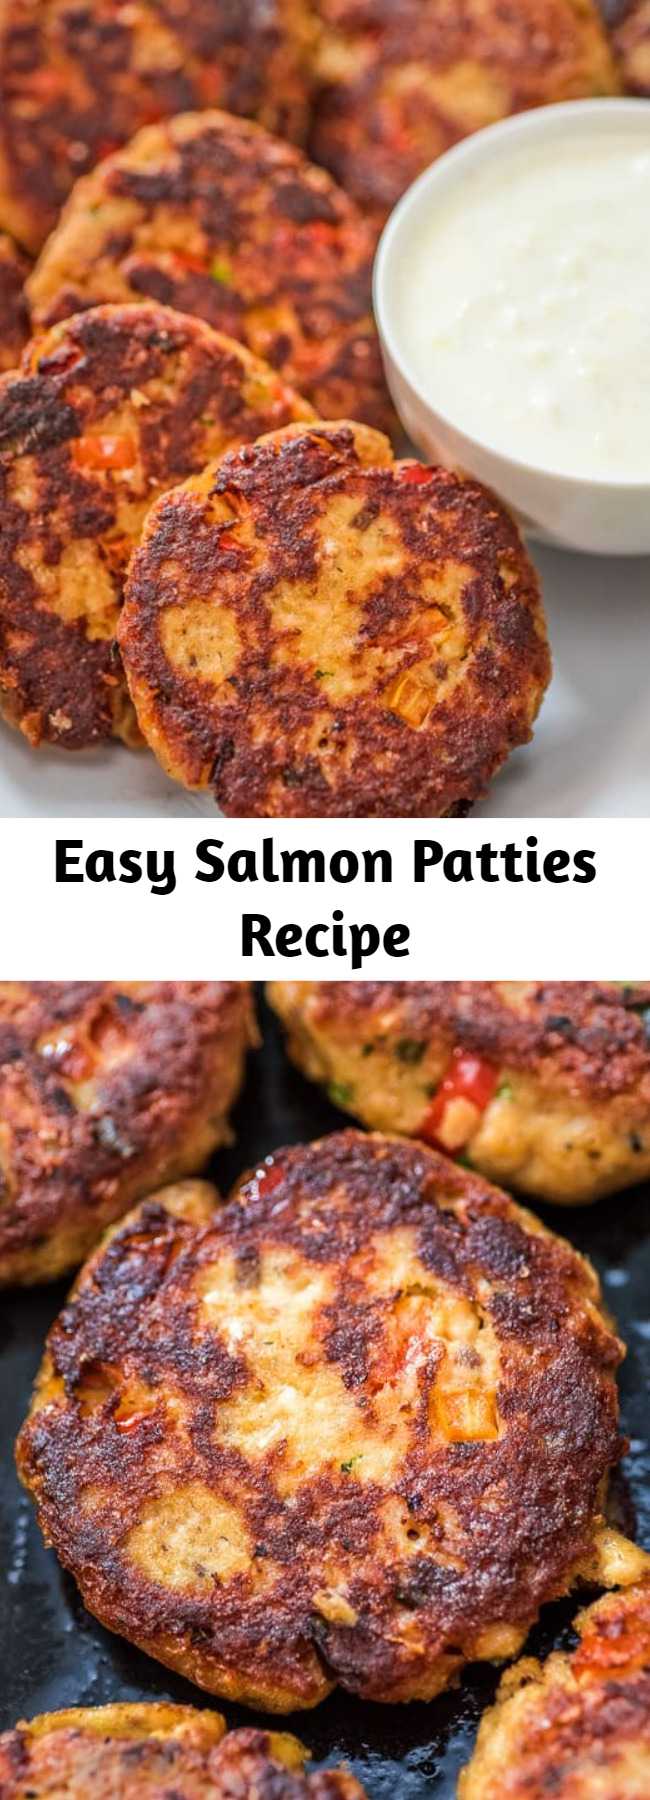 Easy Salmon Patties Recipe - This Easy Salmon Patty recipe is definitely a keeper. Made with canned salmon and simple ingredients, you’ll want to make it again and again. #dinner #lunch #salmon #fish #seafood #recipeoftheday